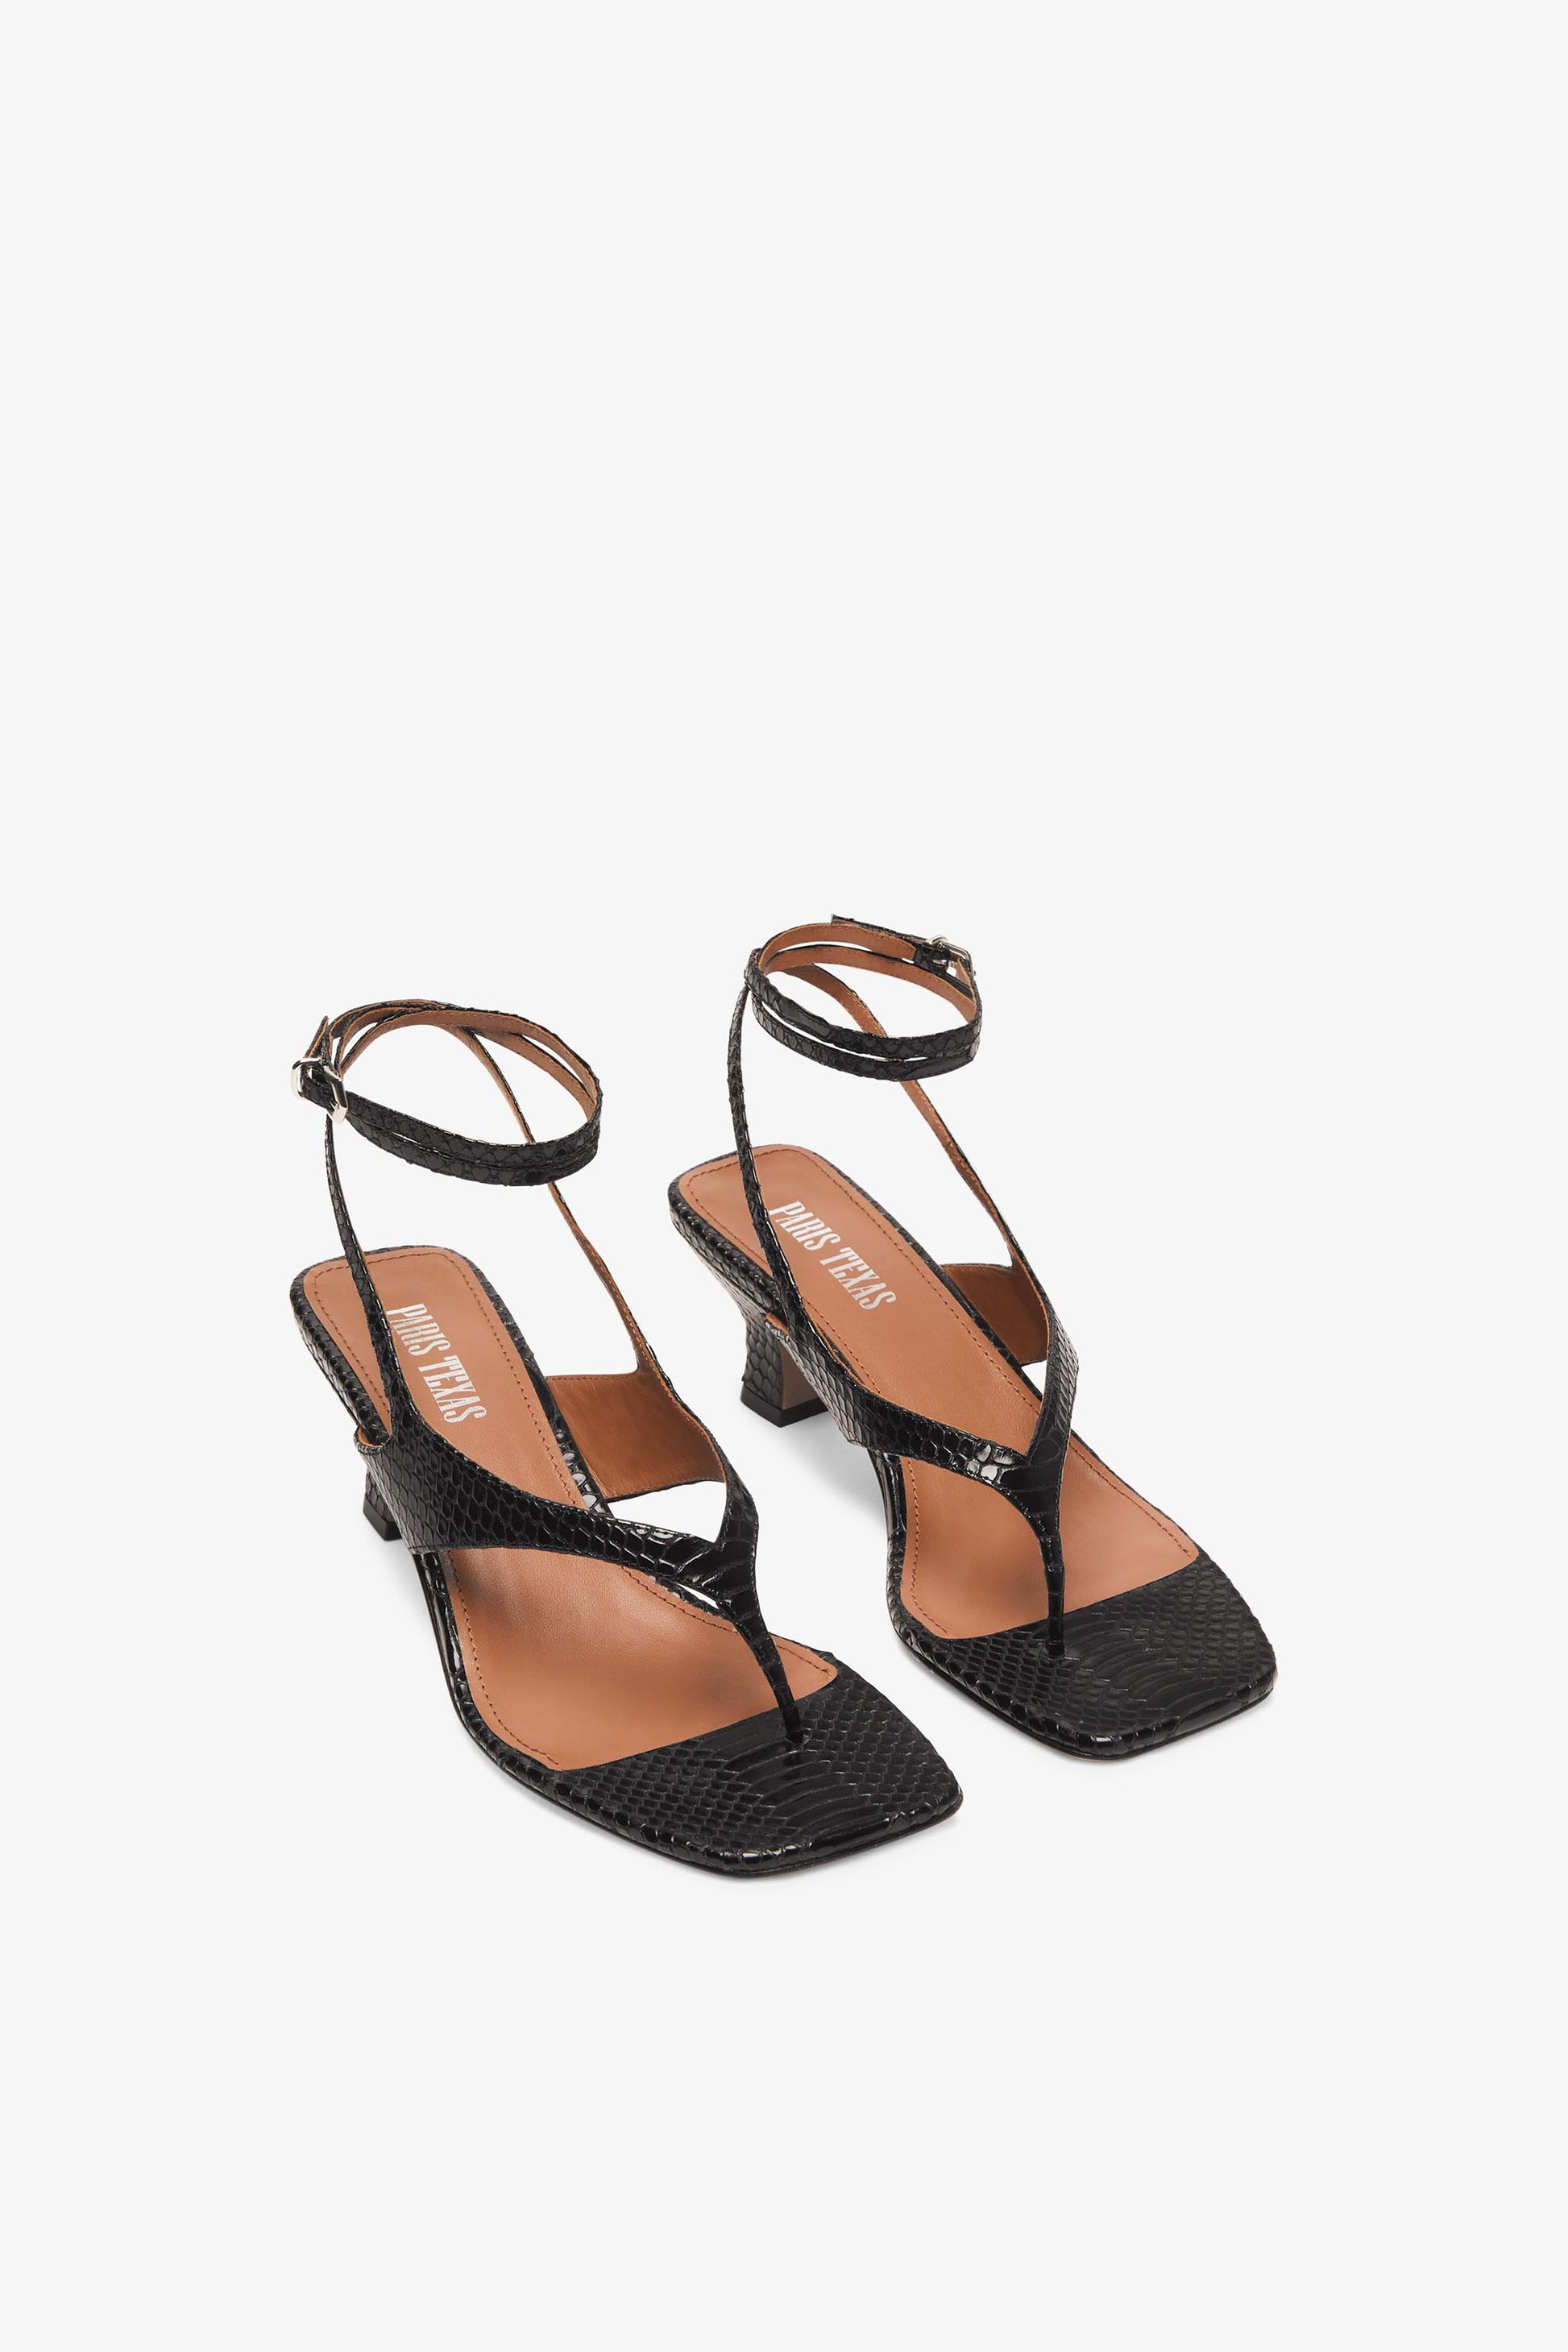 Black ayers-effect leather sandal